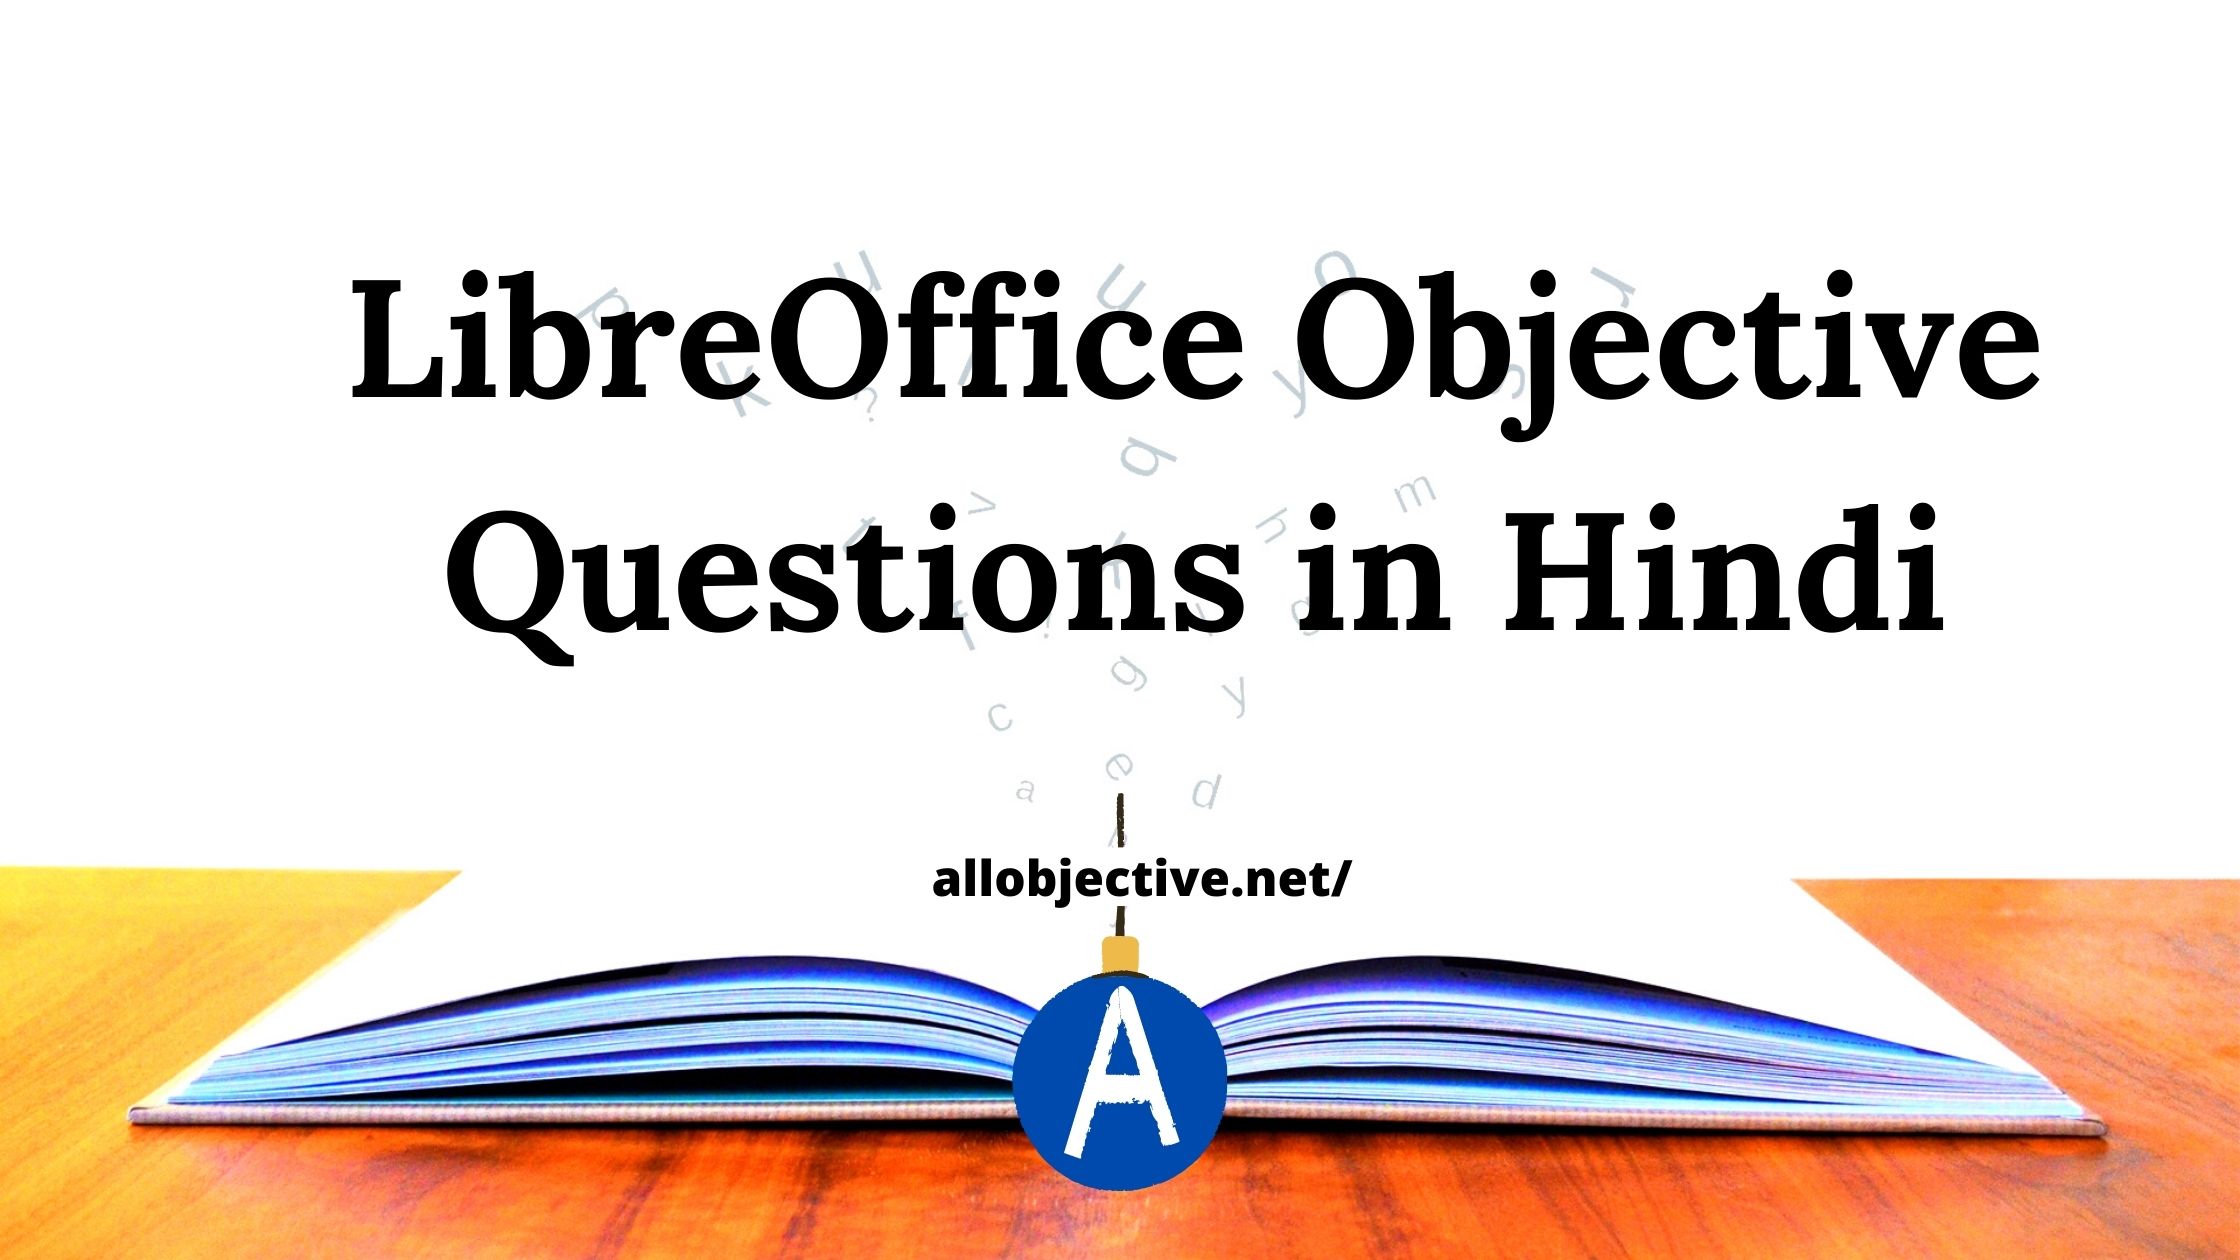 LibreOffice Objective Questions in Hindi